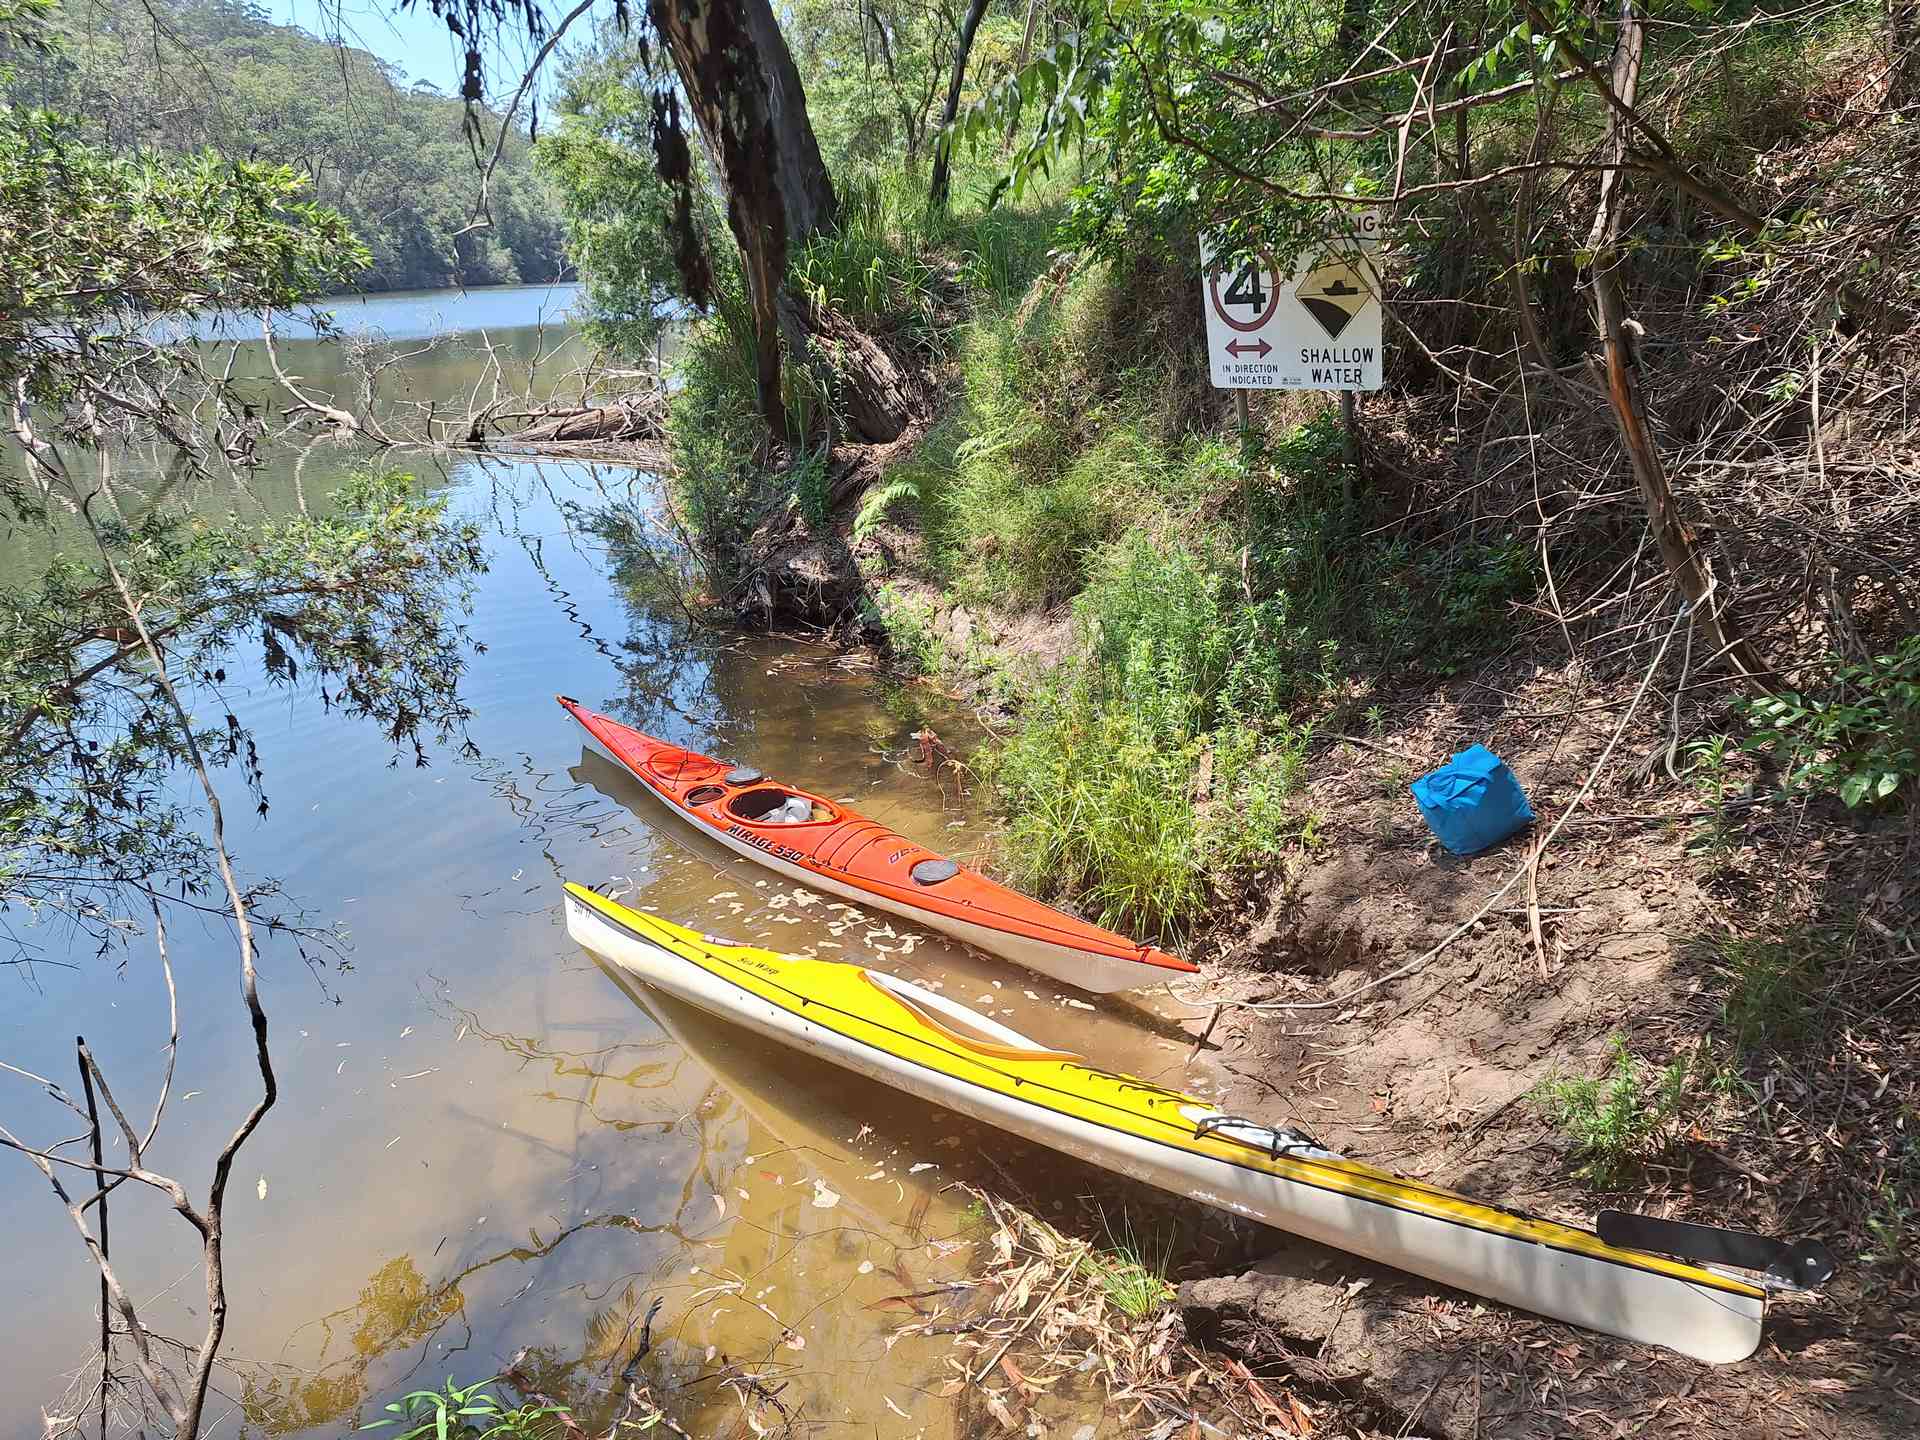 Start at Colo about 6kms upstream from the Hawkesbury.